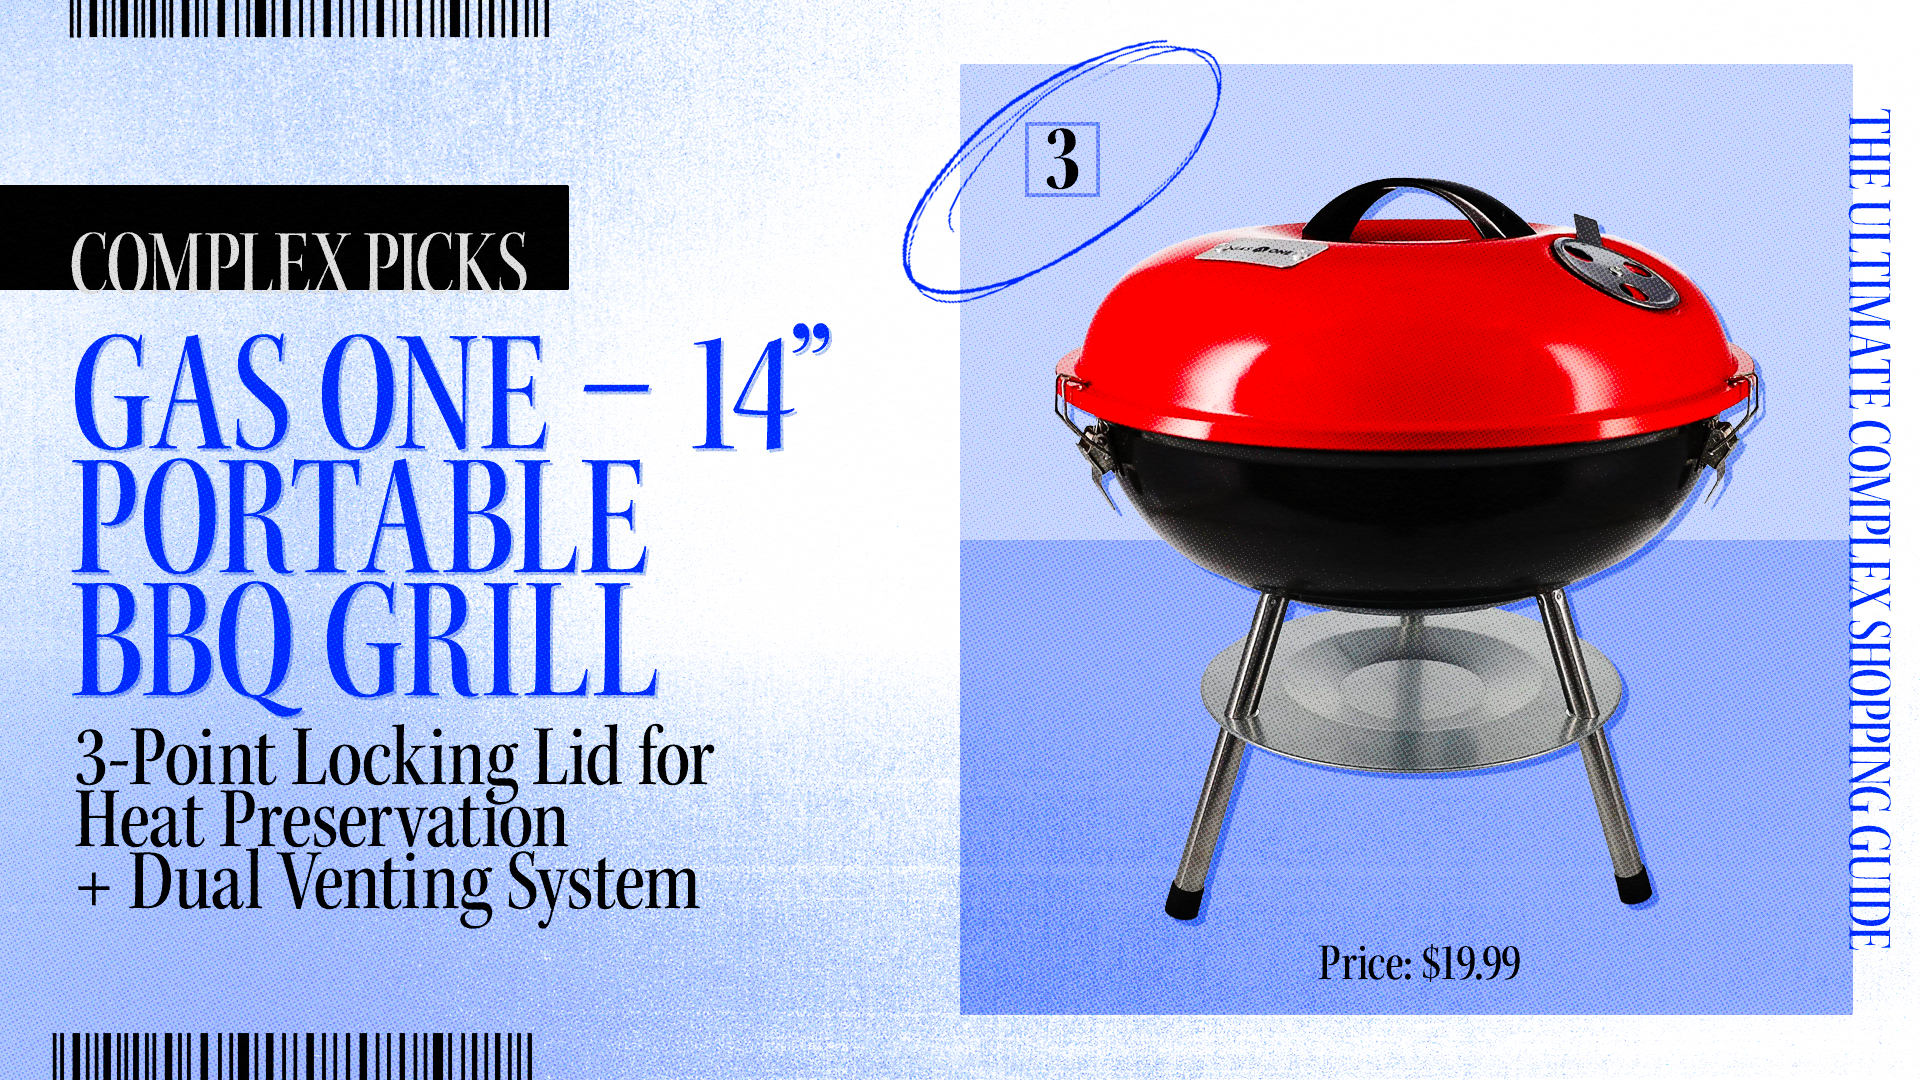 Gas One 14-inch portable BBQ grill, with 3-point locking lid and dual venting system, priced at $19.99